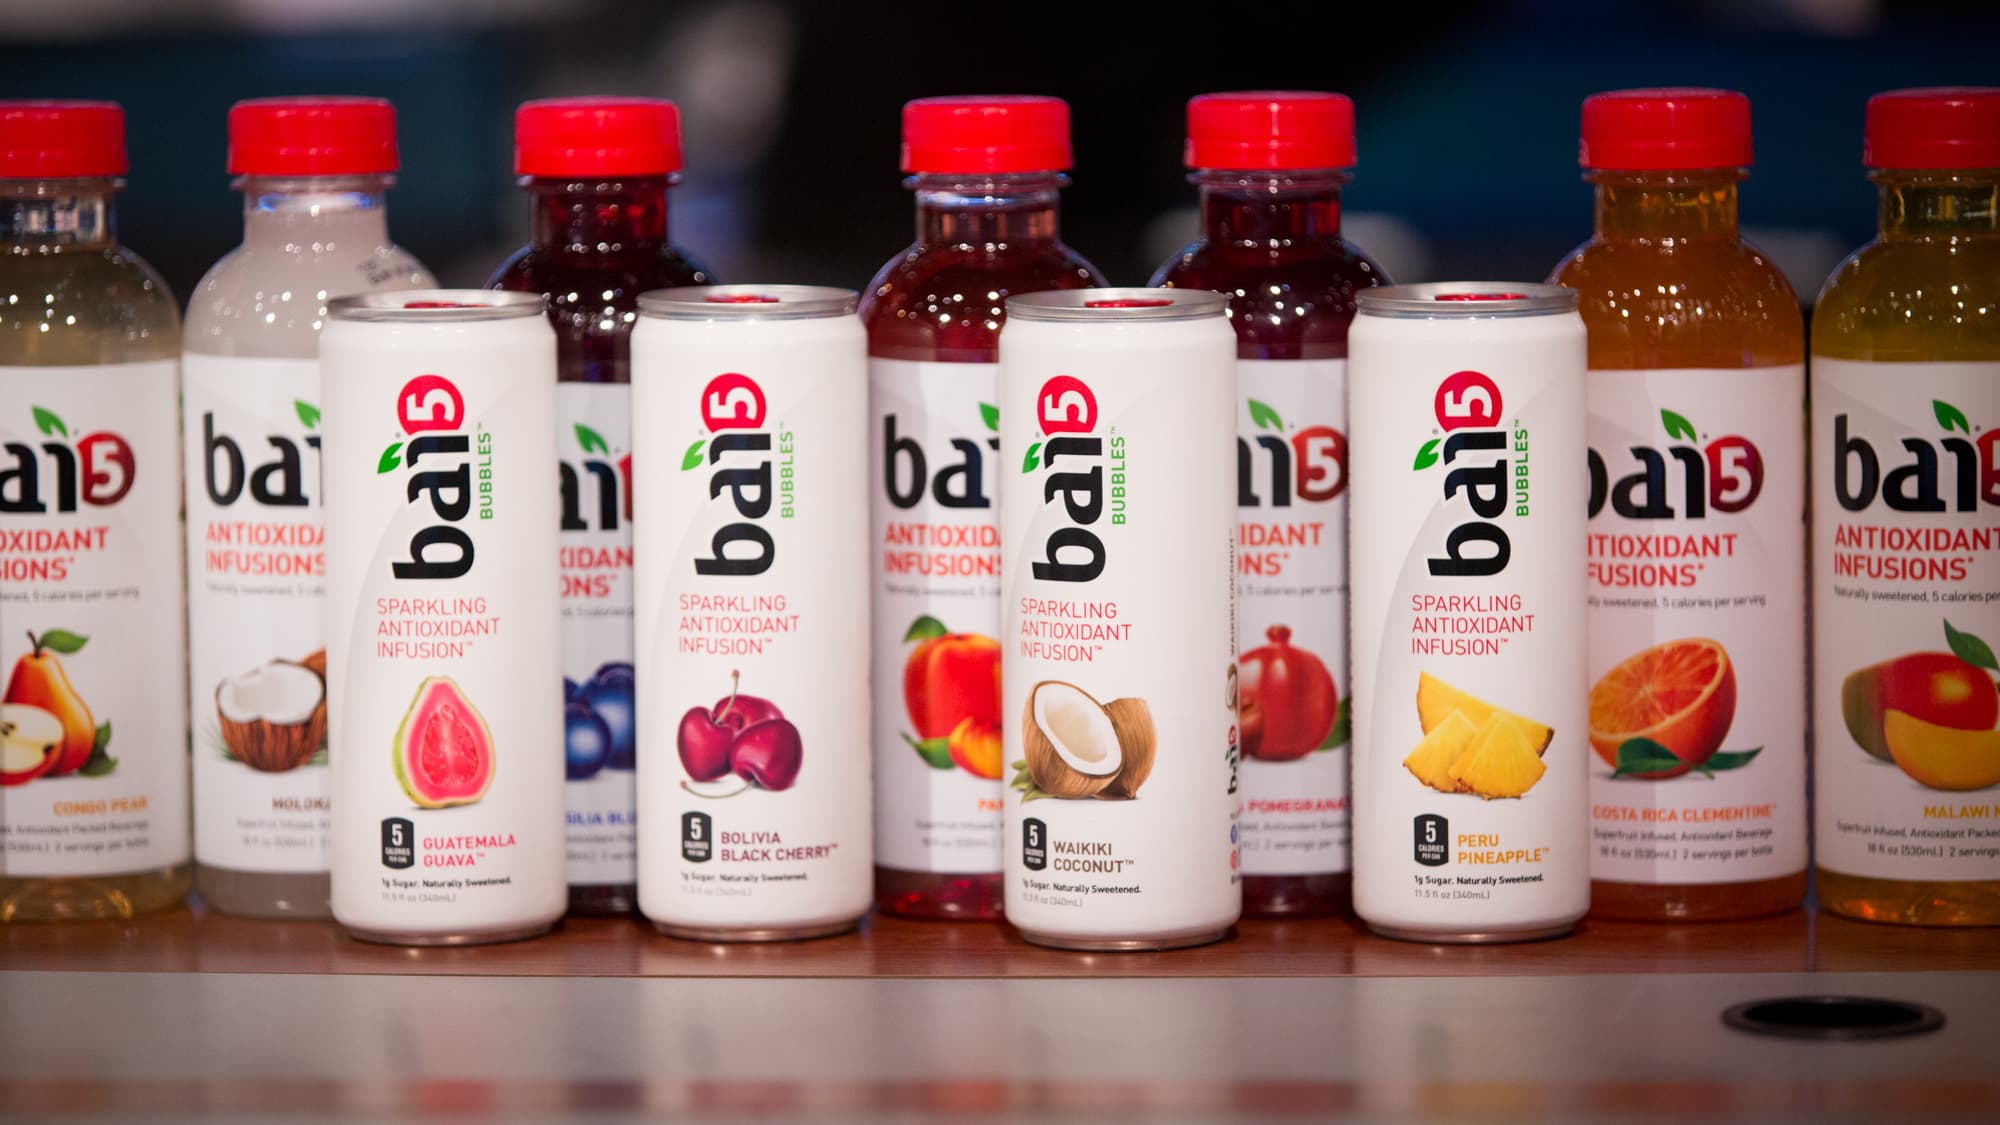 19-facts-about-bai-brands